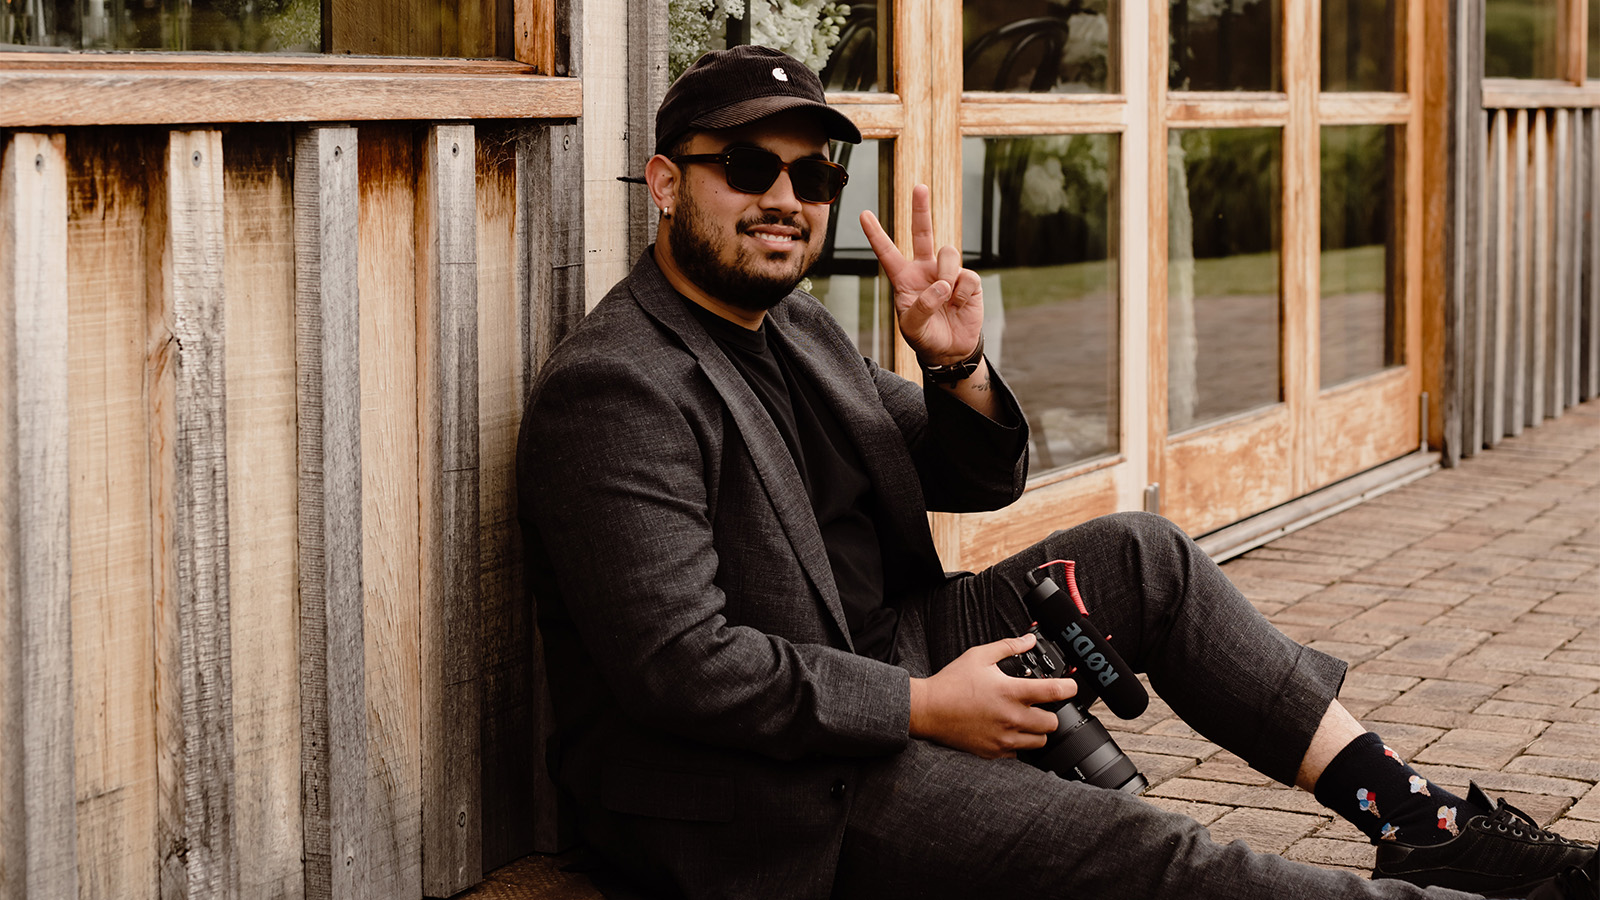 A man is sitting down against a rustic barn, holding a video camera and doing a peace sign with his hands, smiling